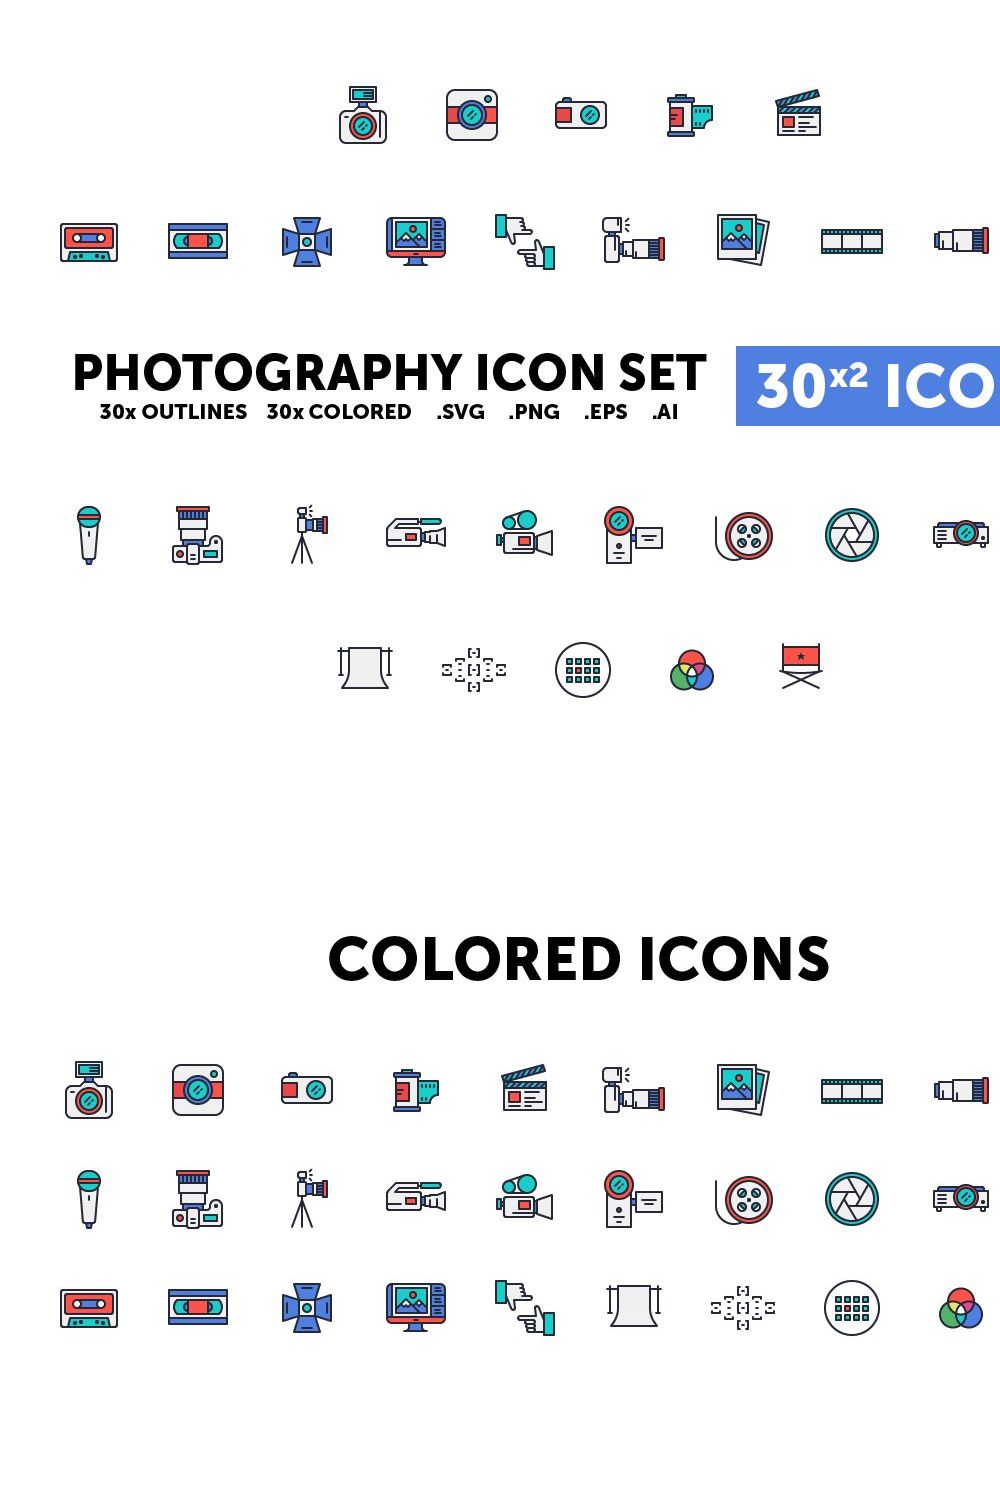 Photography Icon Set - 30(x2) Icons pinterest preview image.